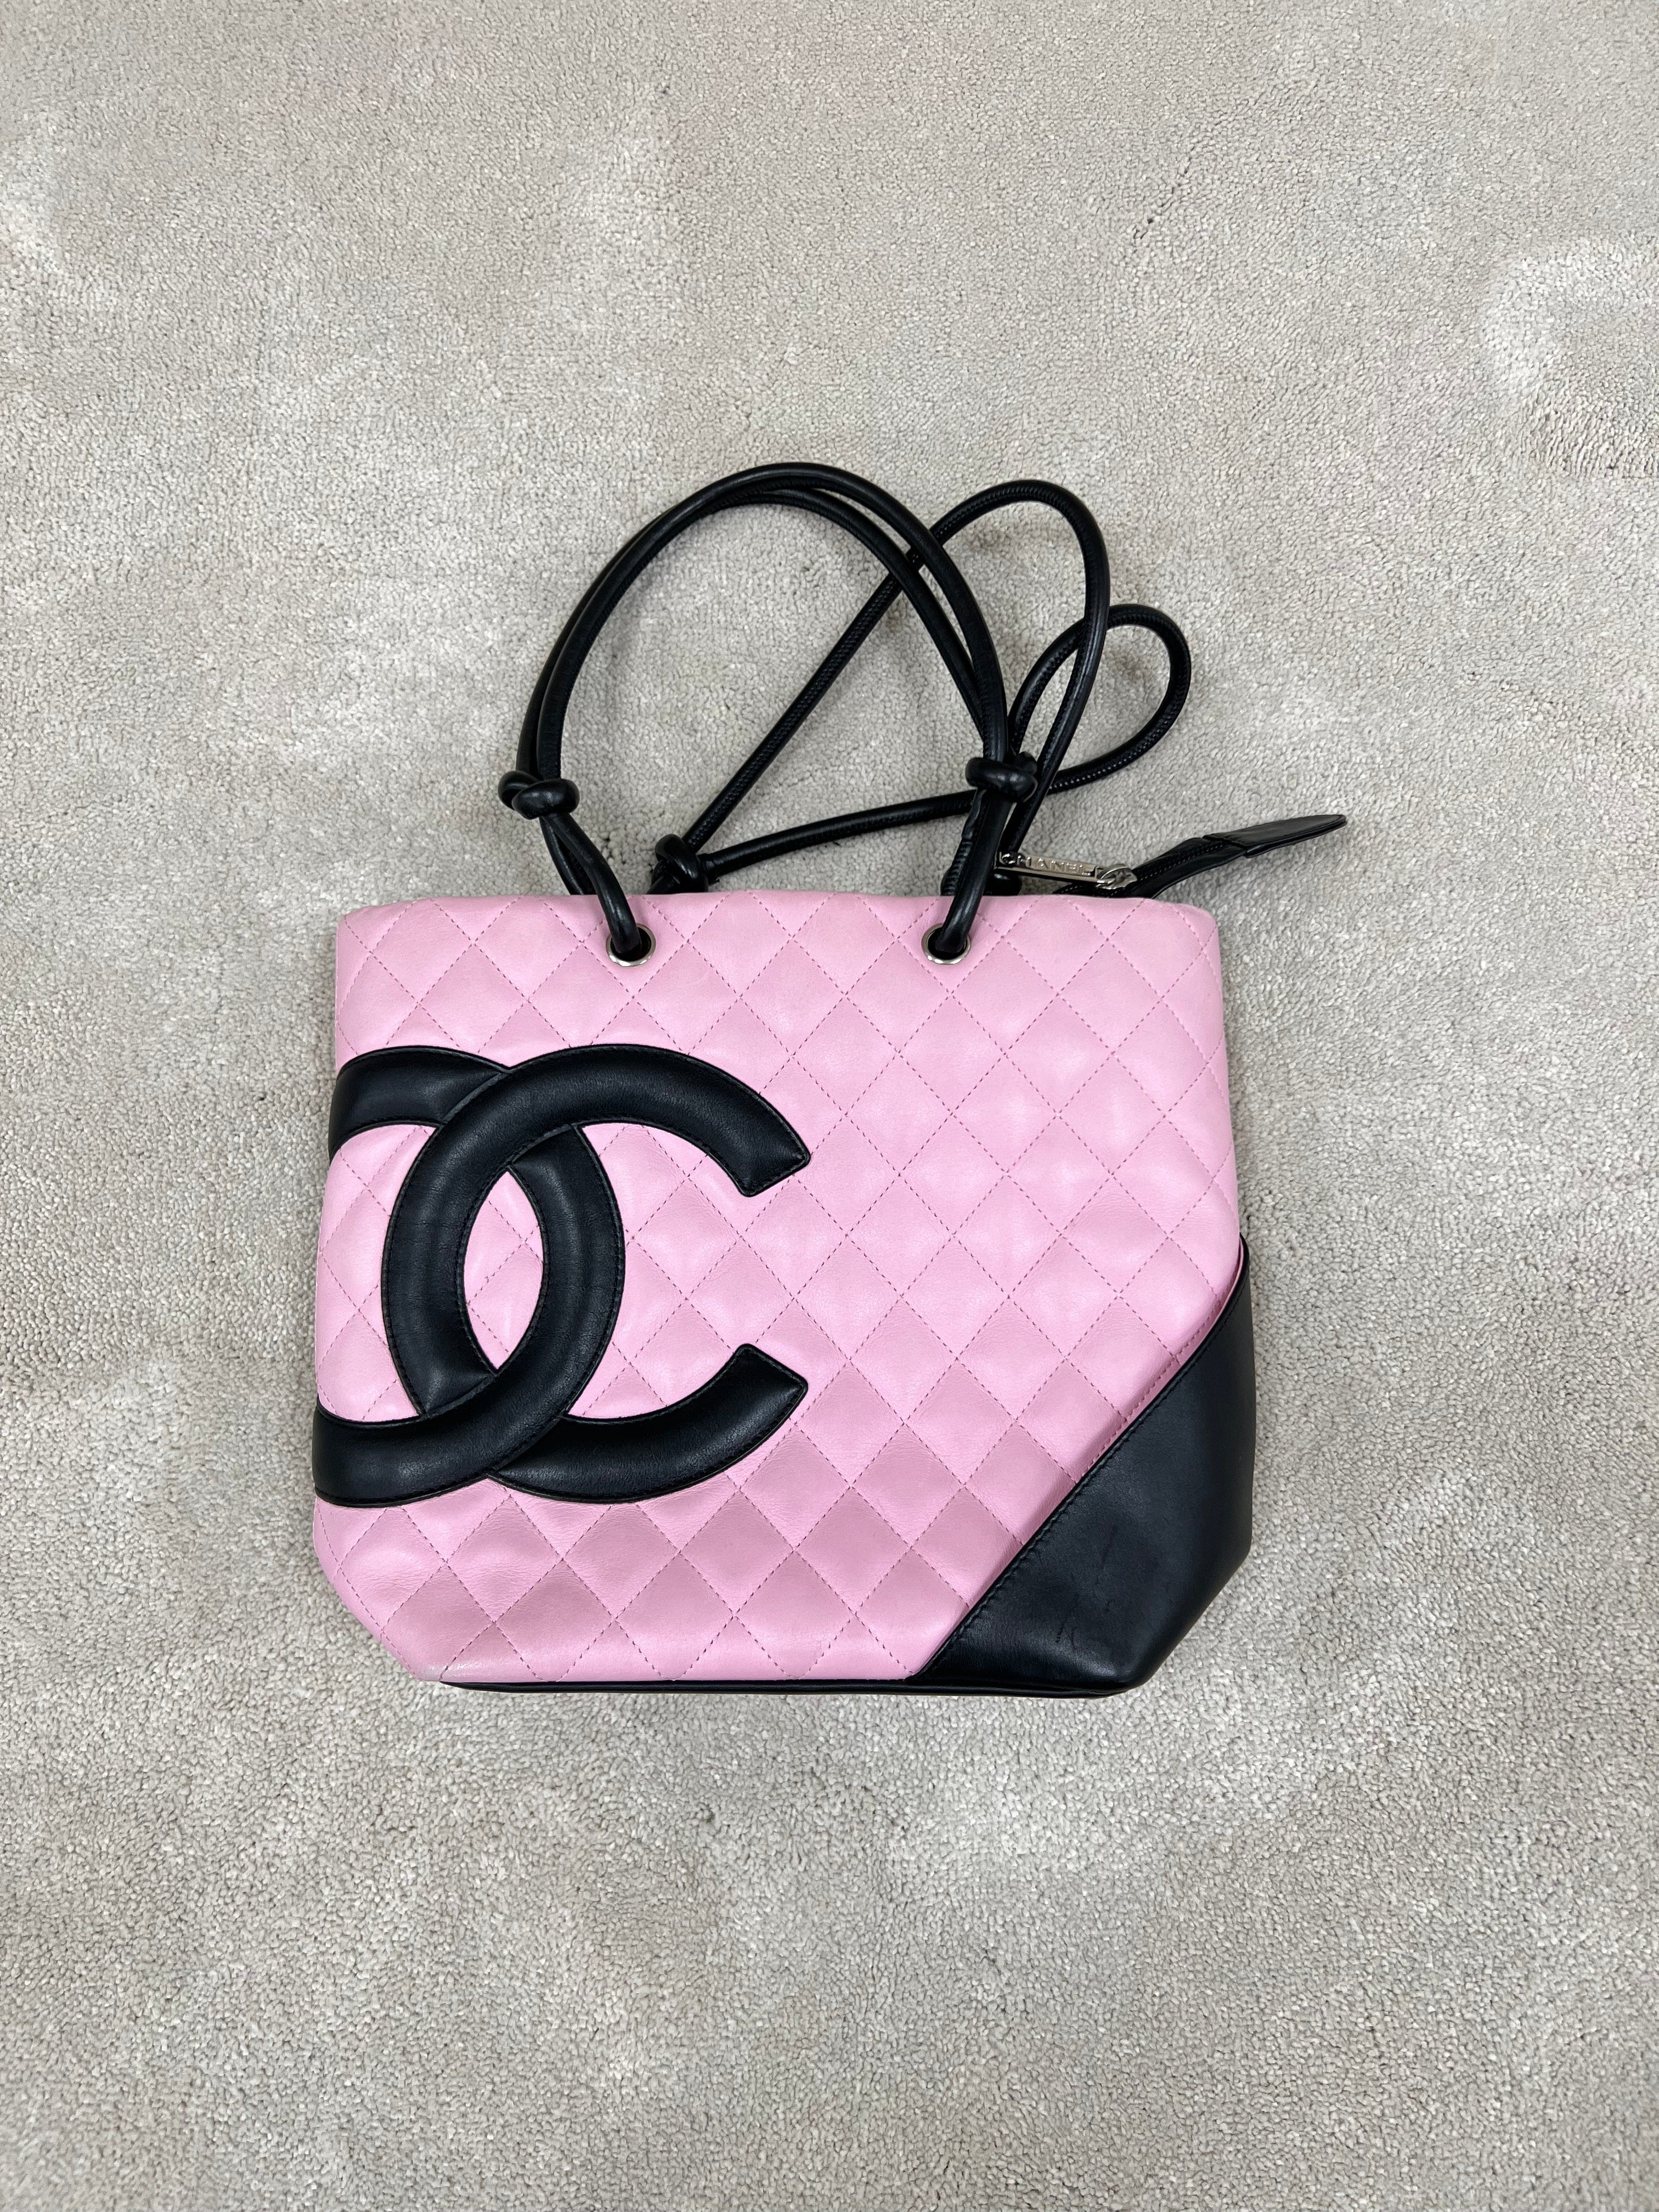 Chanel Crossing Times Bag Pink - Lambskin Leather SHW